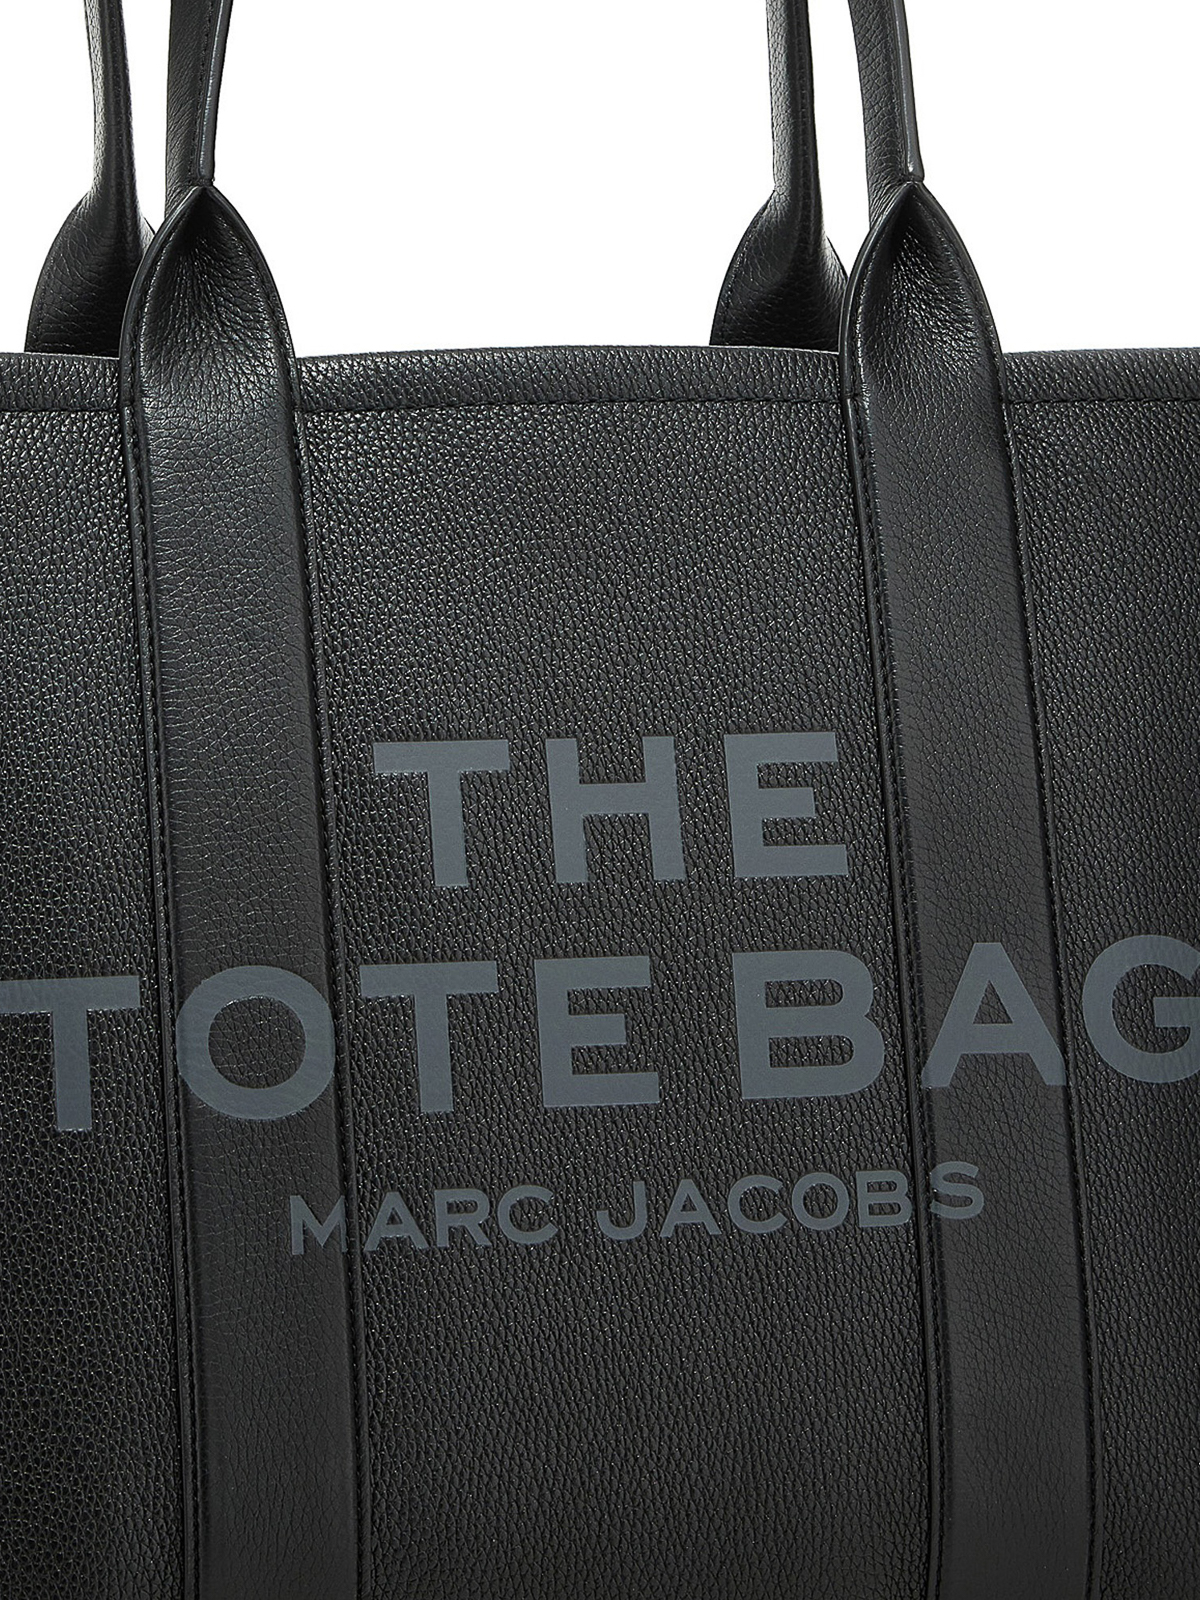 Shop Marc Jacobs Shopping The Leather Large Tote In Black